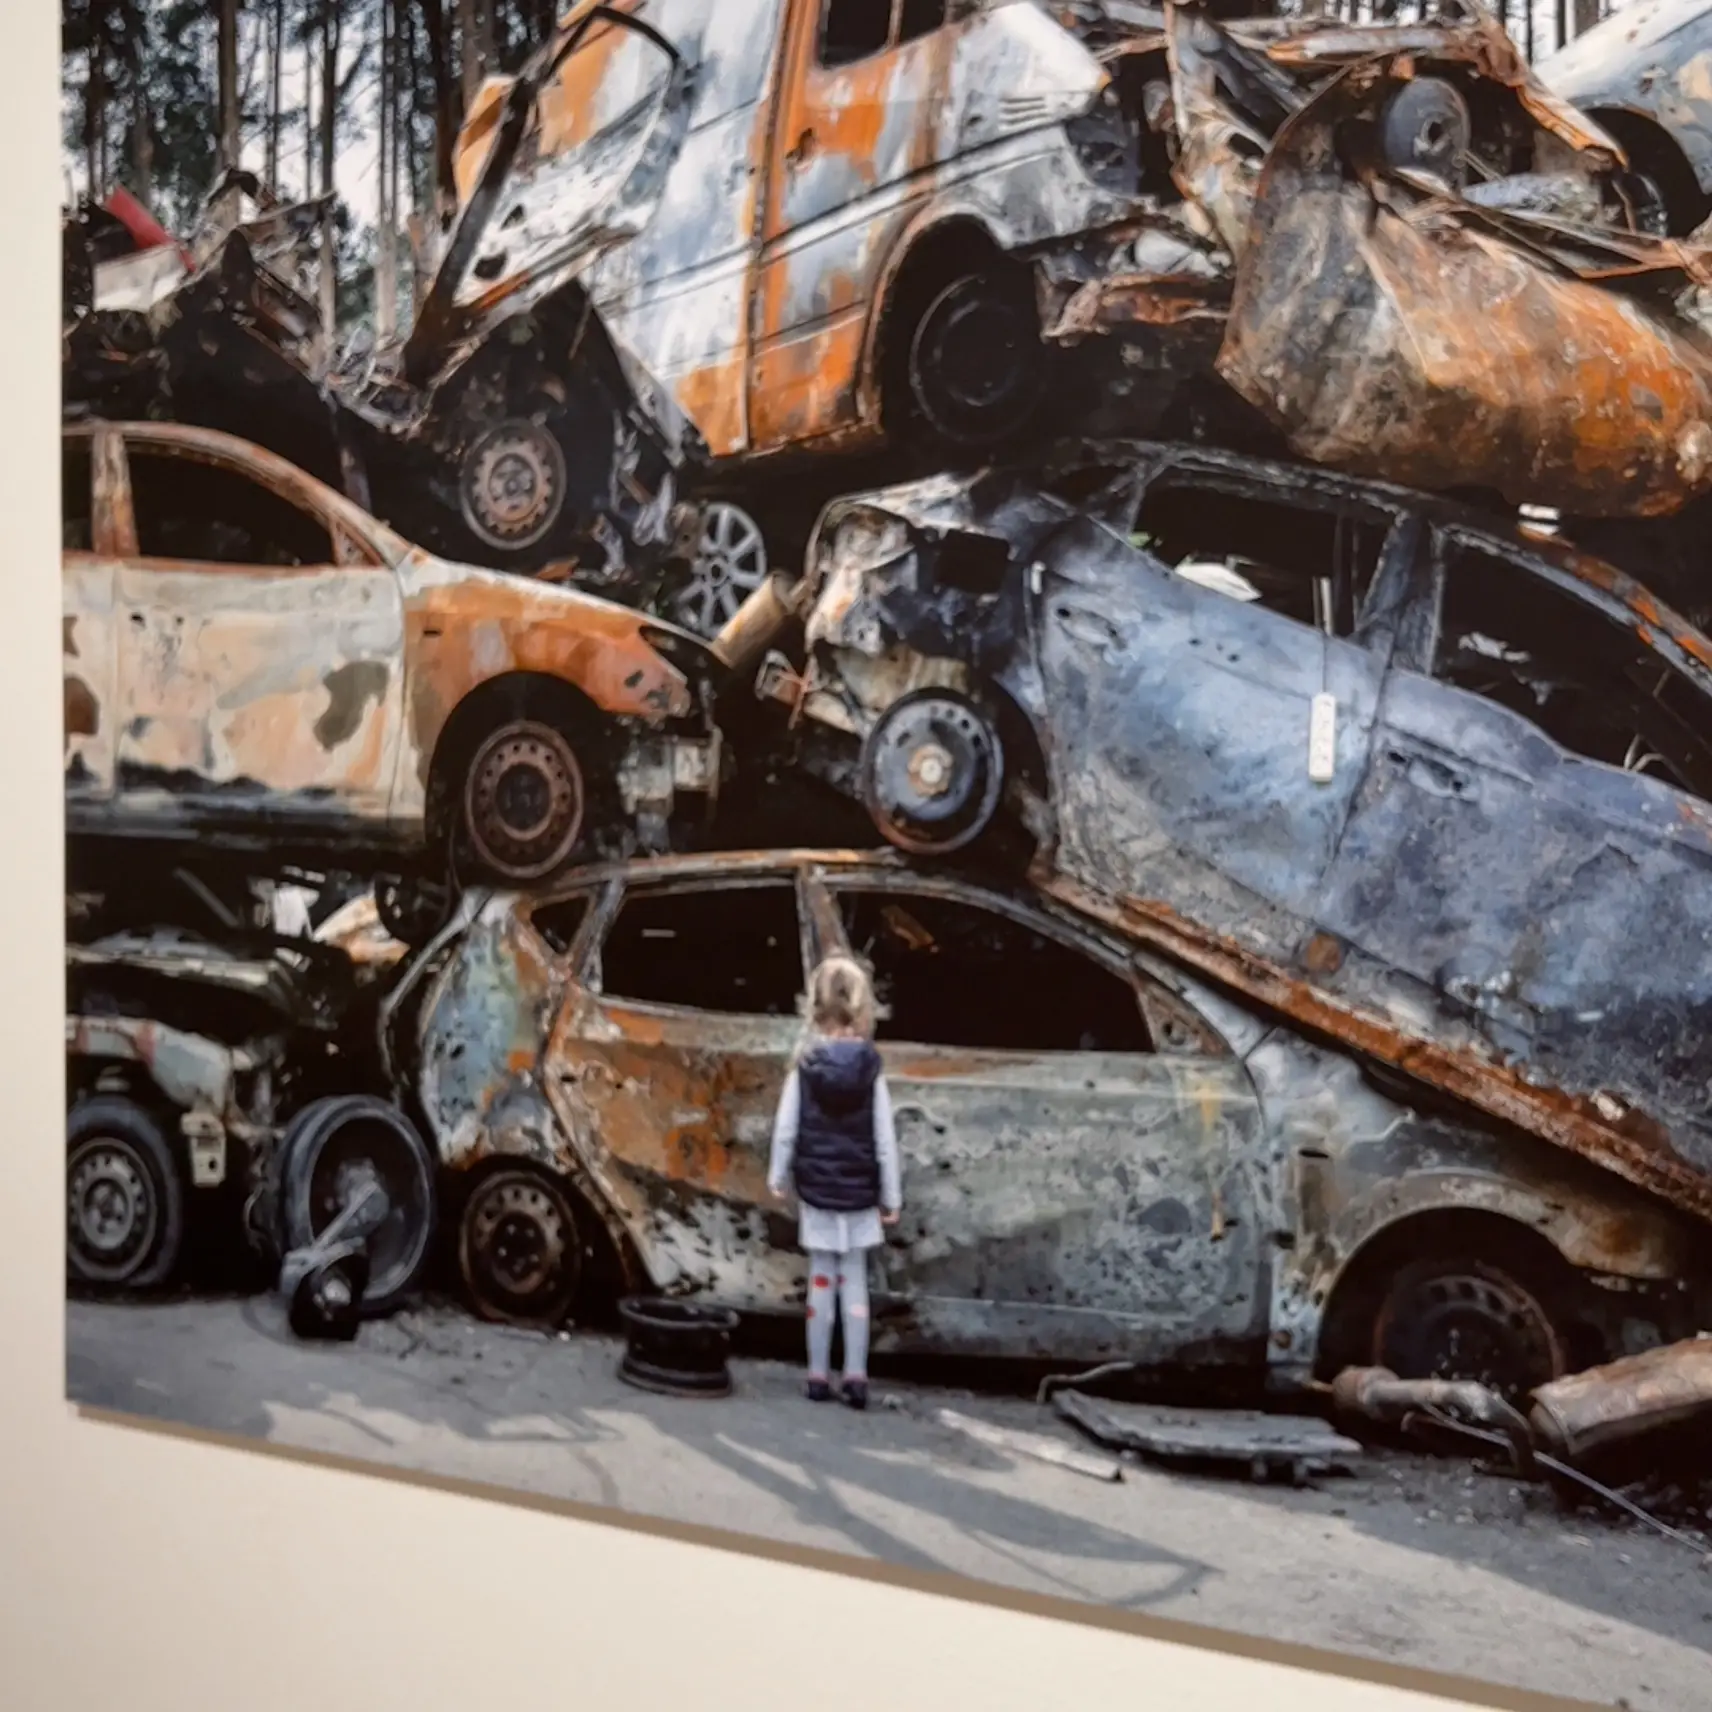  A woman is standing in front of a pile of cars that are crashed and burned.